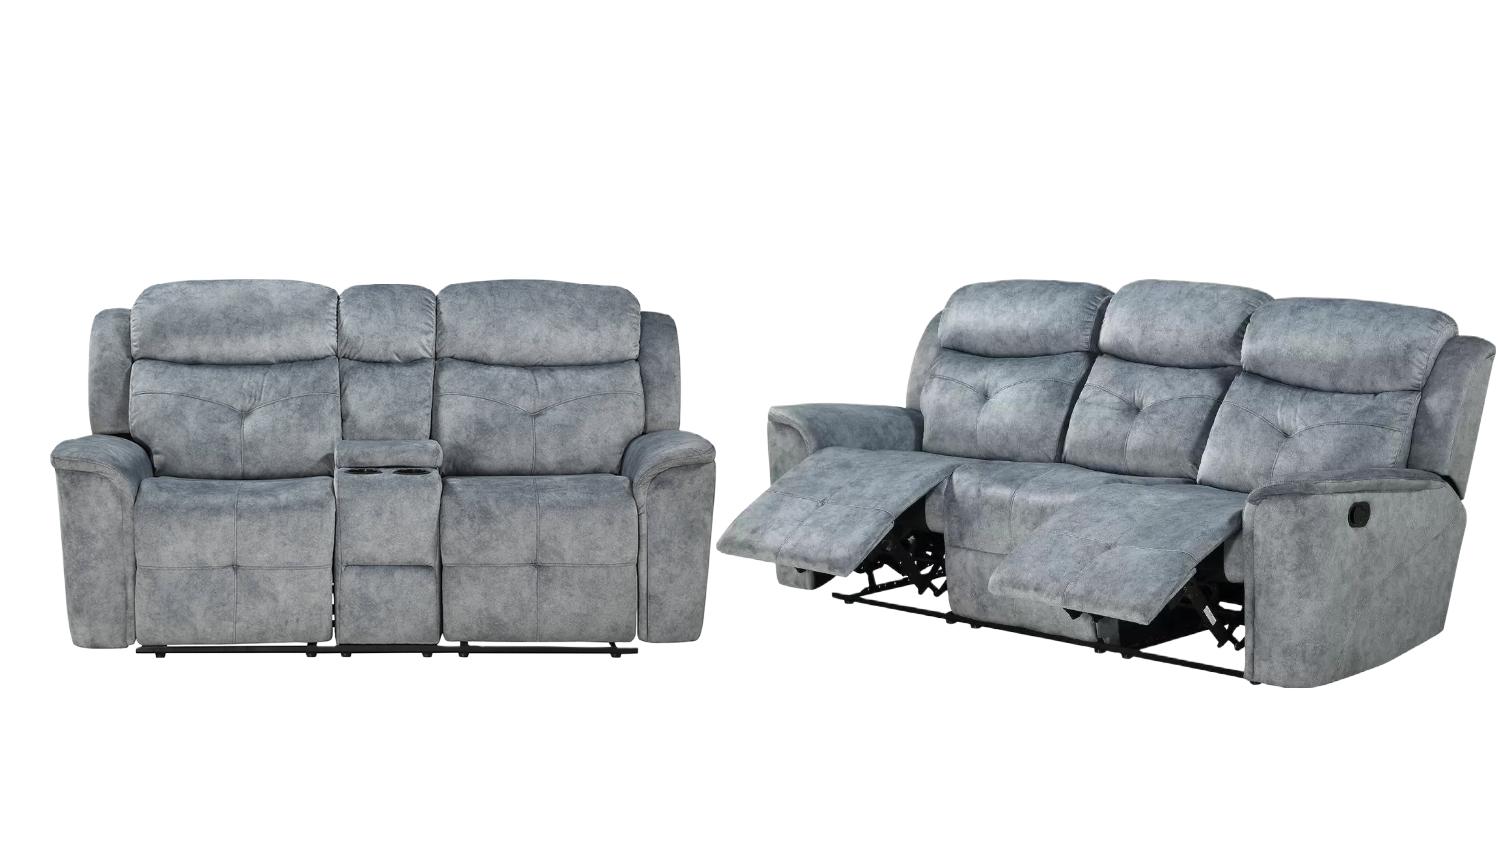 Modern Sofa and Loveseat Mariana 55030-2pcs in Silver Fabric